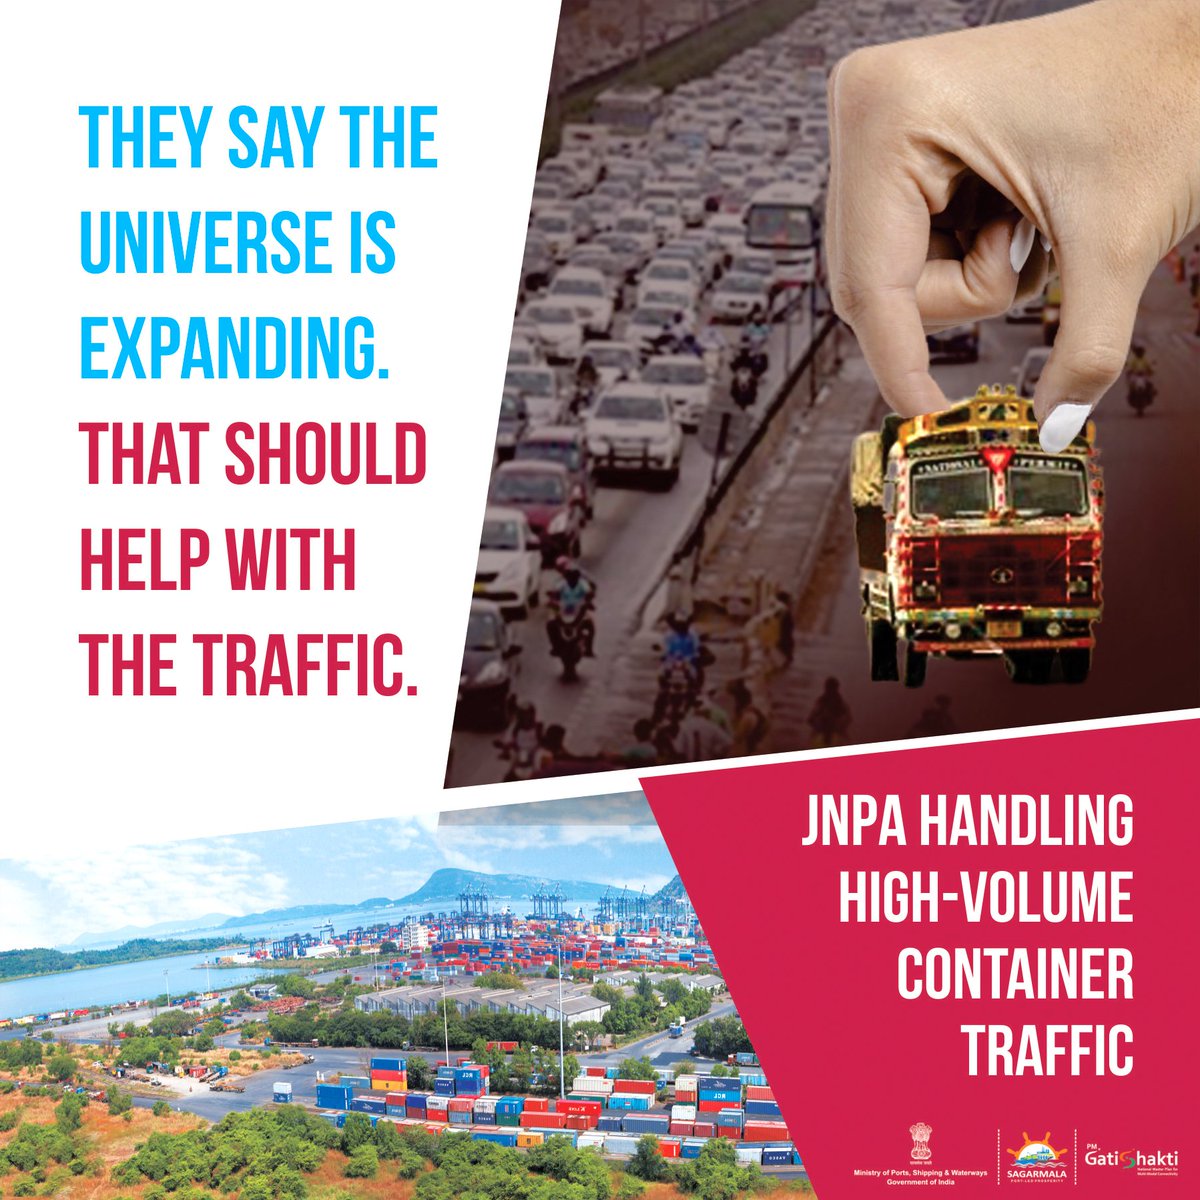 JNPA commissioned in 1989 as a modern facility to handle high-volume container traffic & take lorries off the streets of Mumbai city. Today @JNPort is India’s most efficient public port for half of India’s container traffic of major ports & a quarter of the customs revenue.